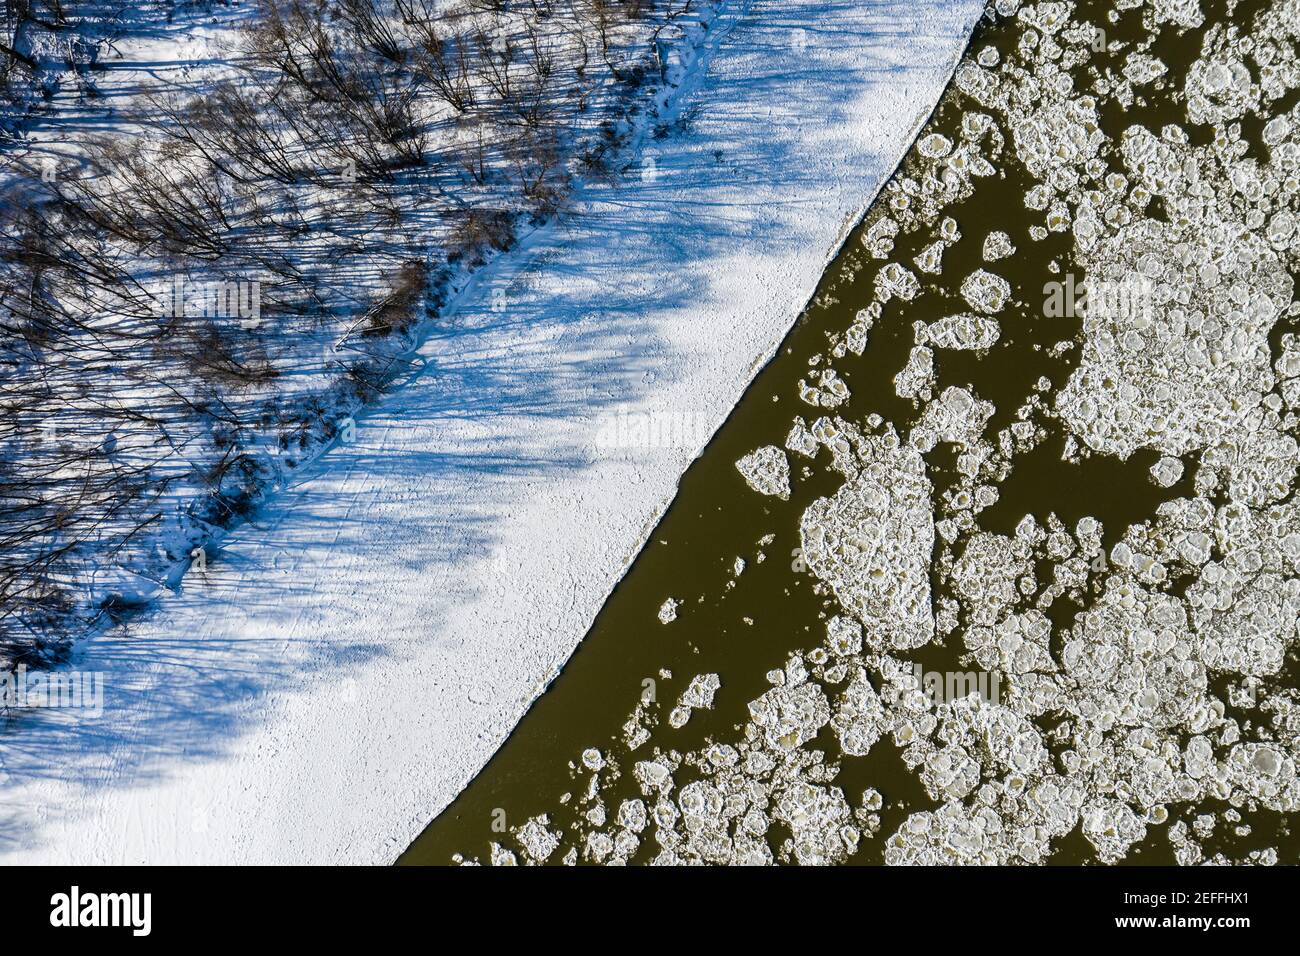 Ice floe on the river aerial view Stock Photo